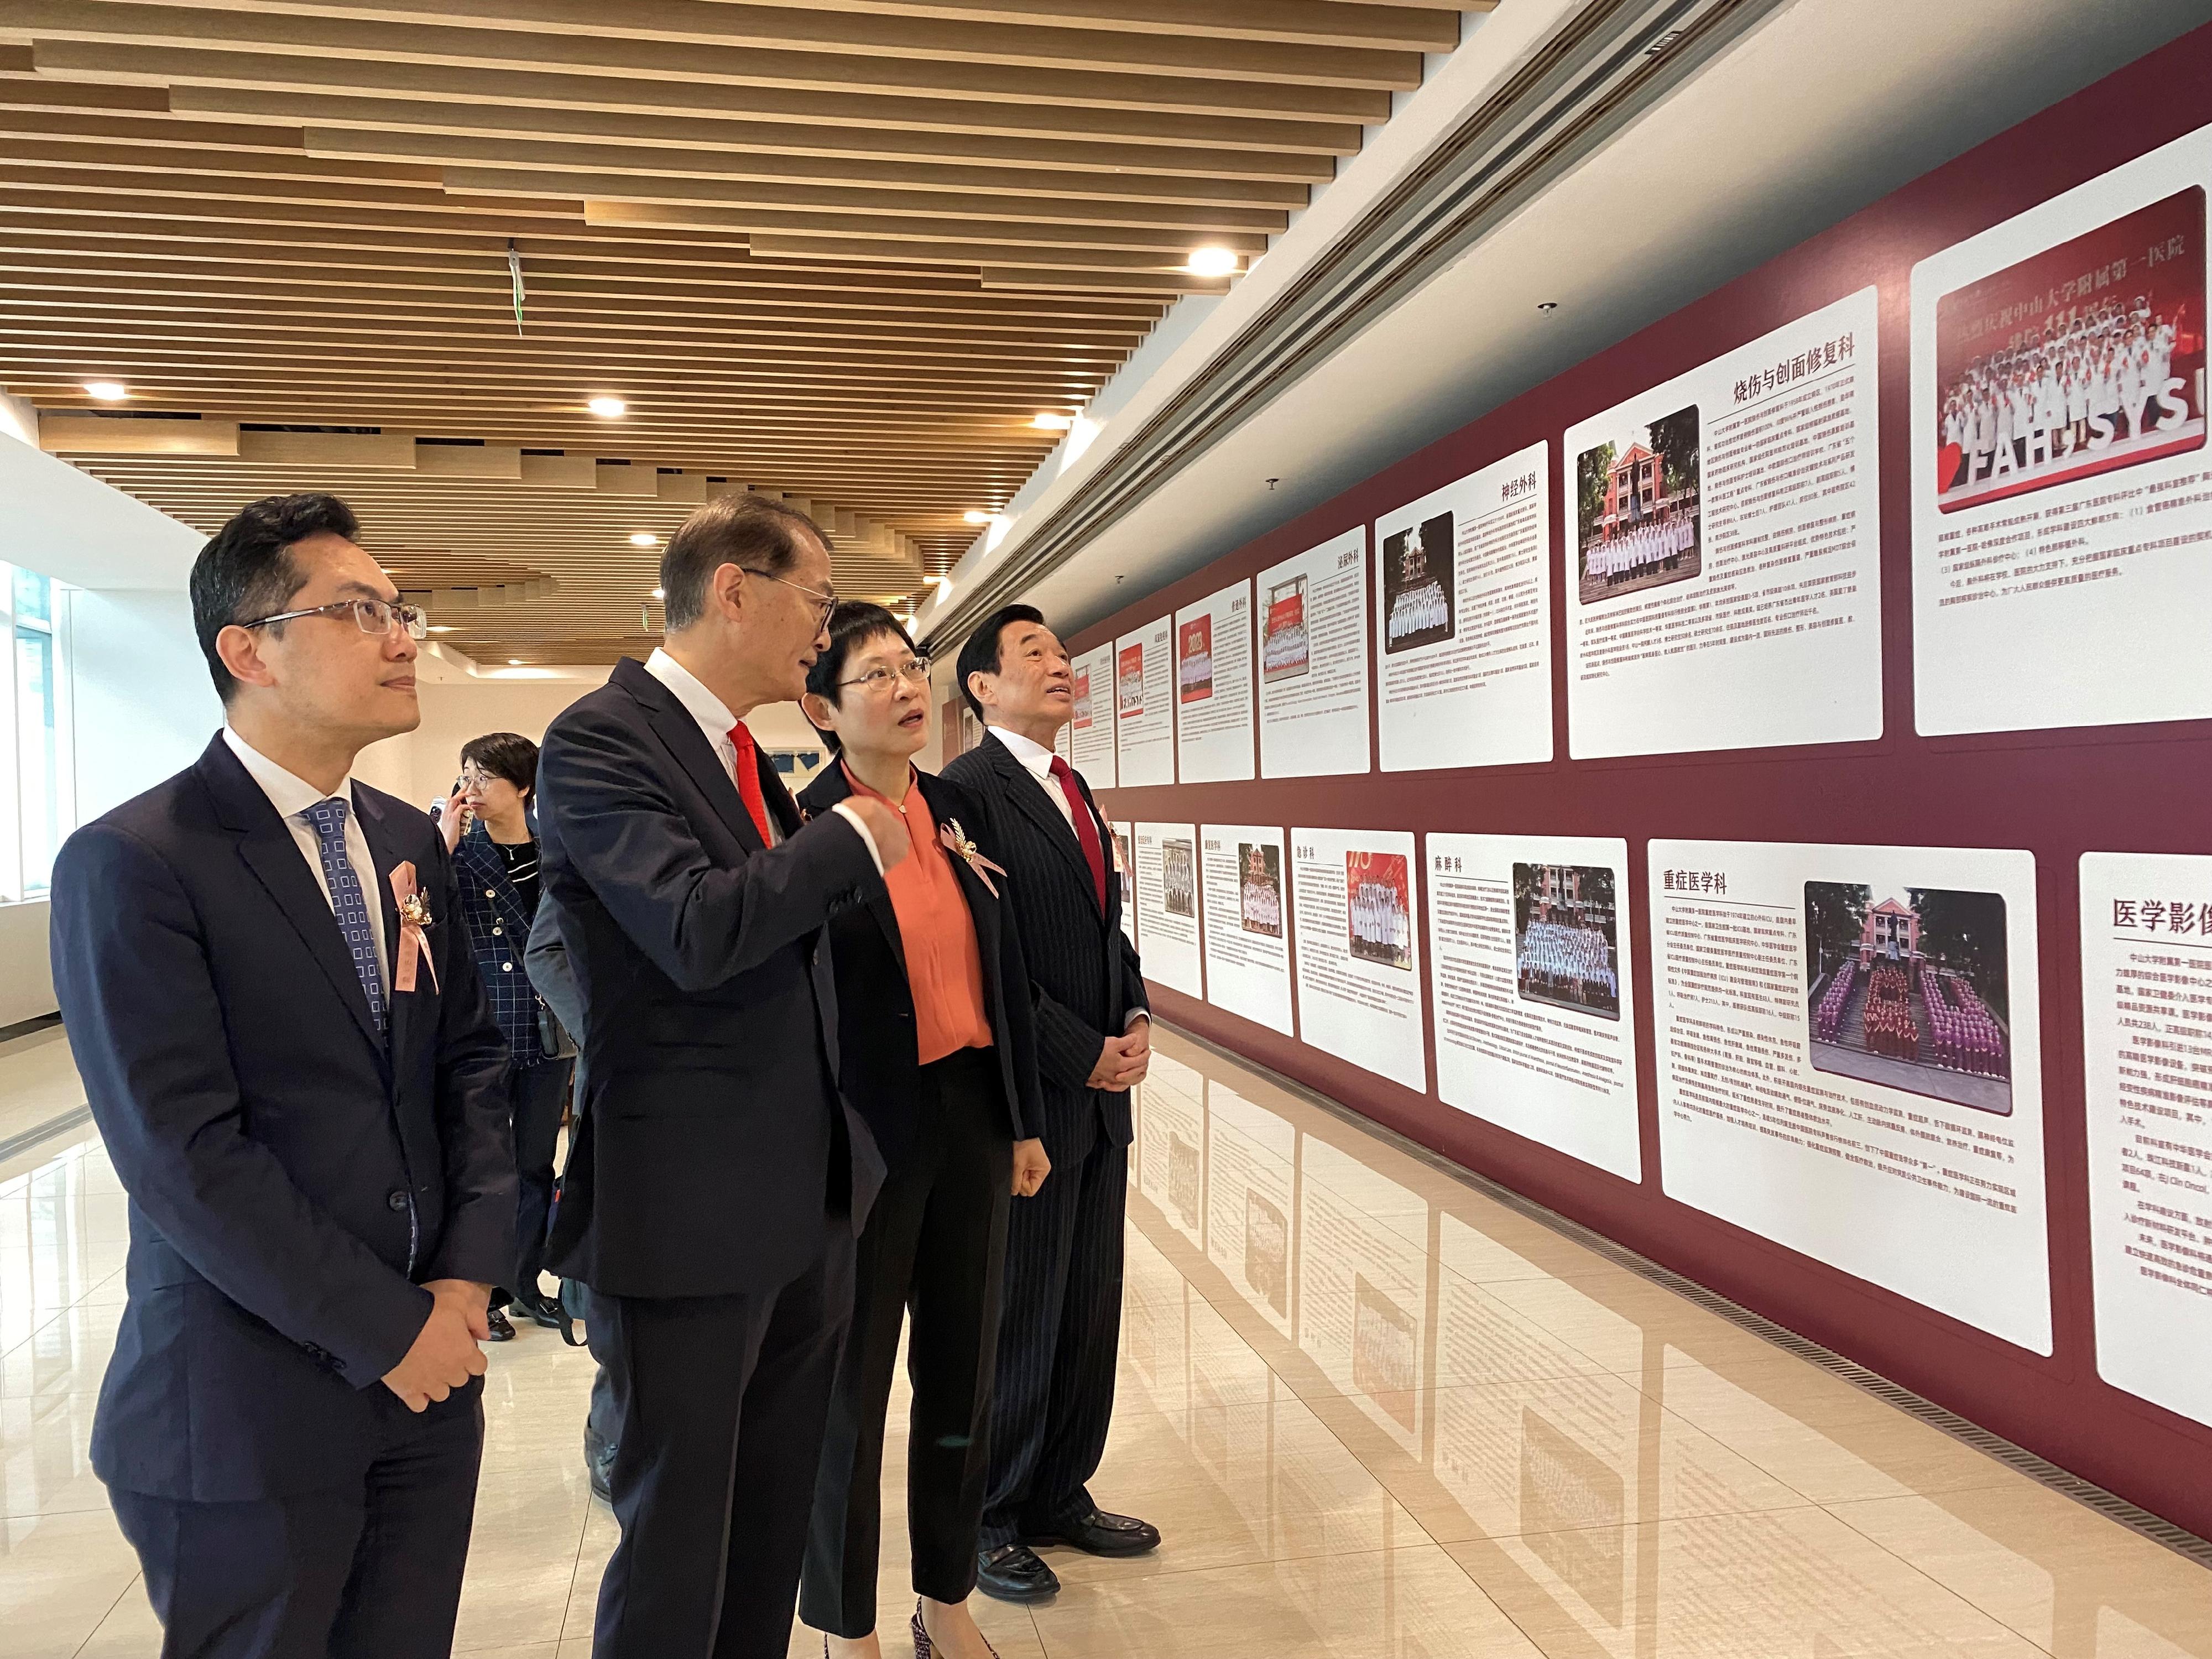 The delegation led by the Secretary for Health, Professor Lo Chung-mau, attended the opening ceremony of the Nansha International Hospital of the First Affiliated Hospital, Sun Yat-sen University this morning (March 29). Photo shows Professor Lo (second left); the Director of Health, Dr Ronald Lam (first left); and the Chairman of the Hospital Authority, Mr Henry Fan (first right), touring the Nansha International Hospital.
